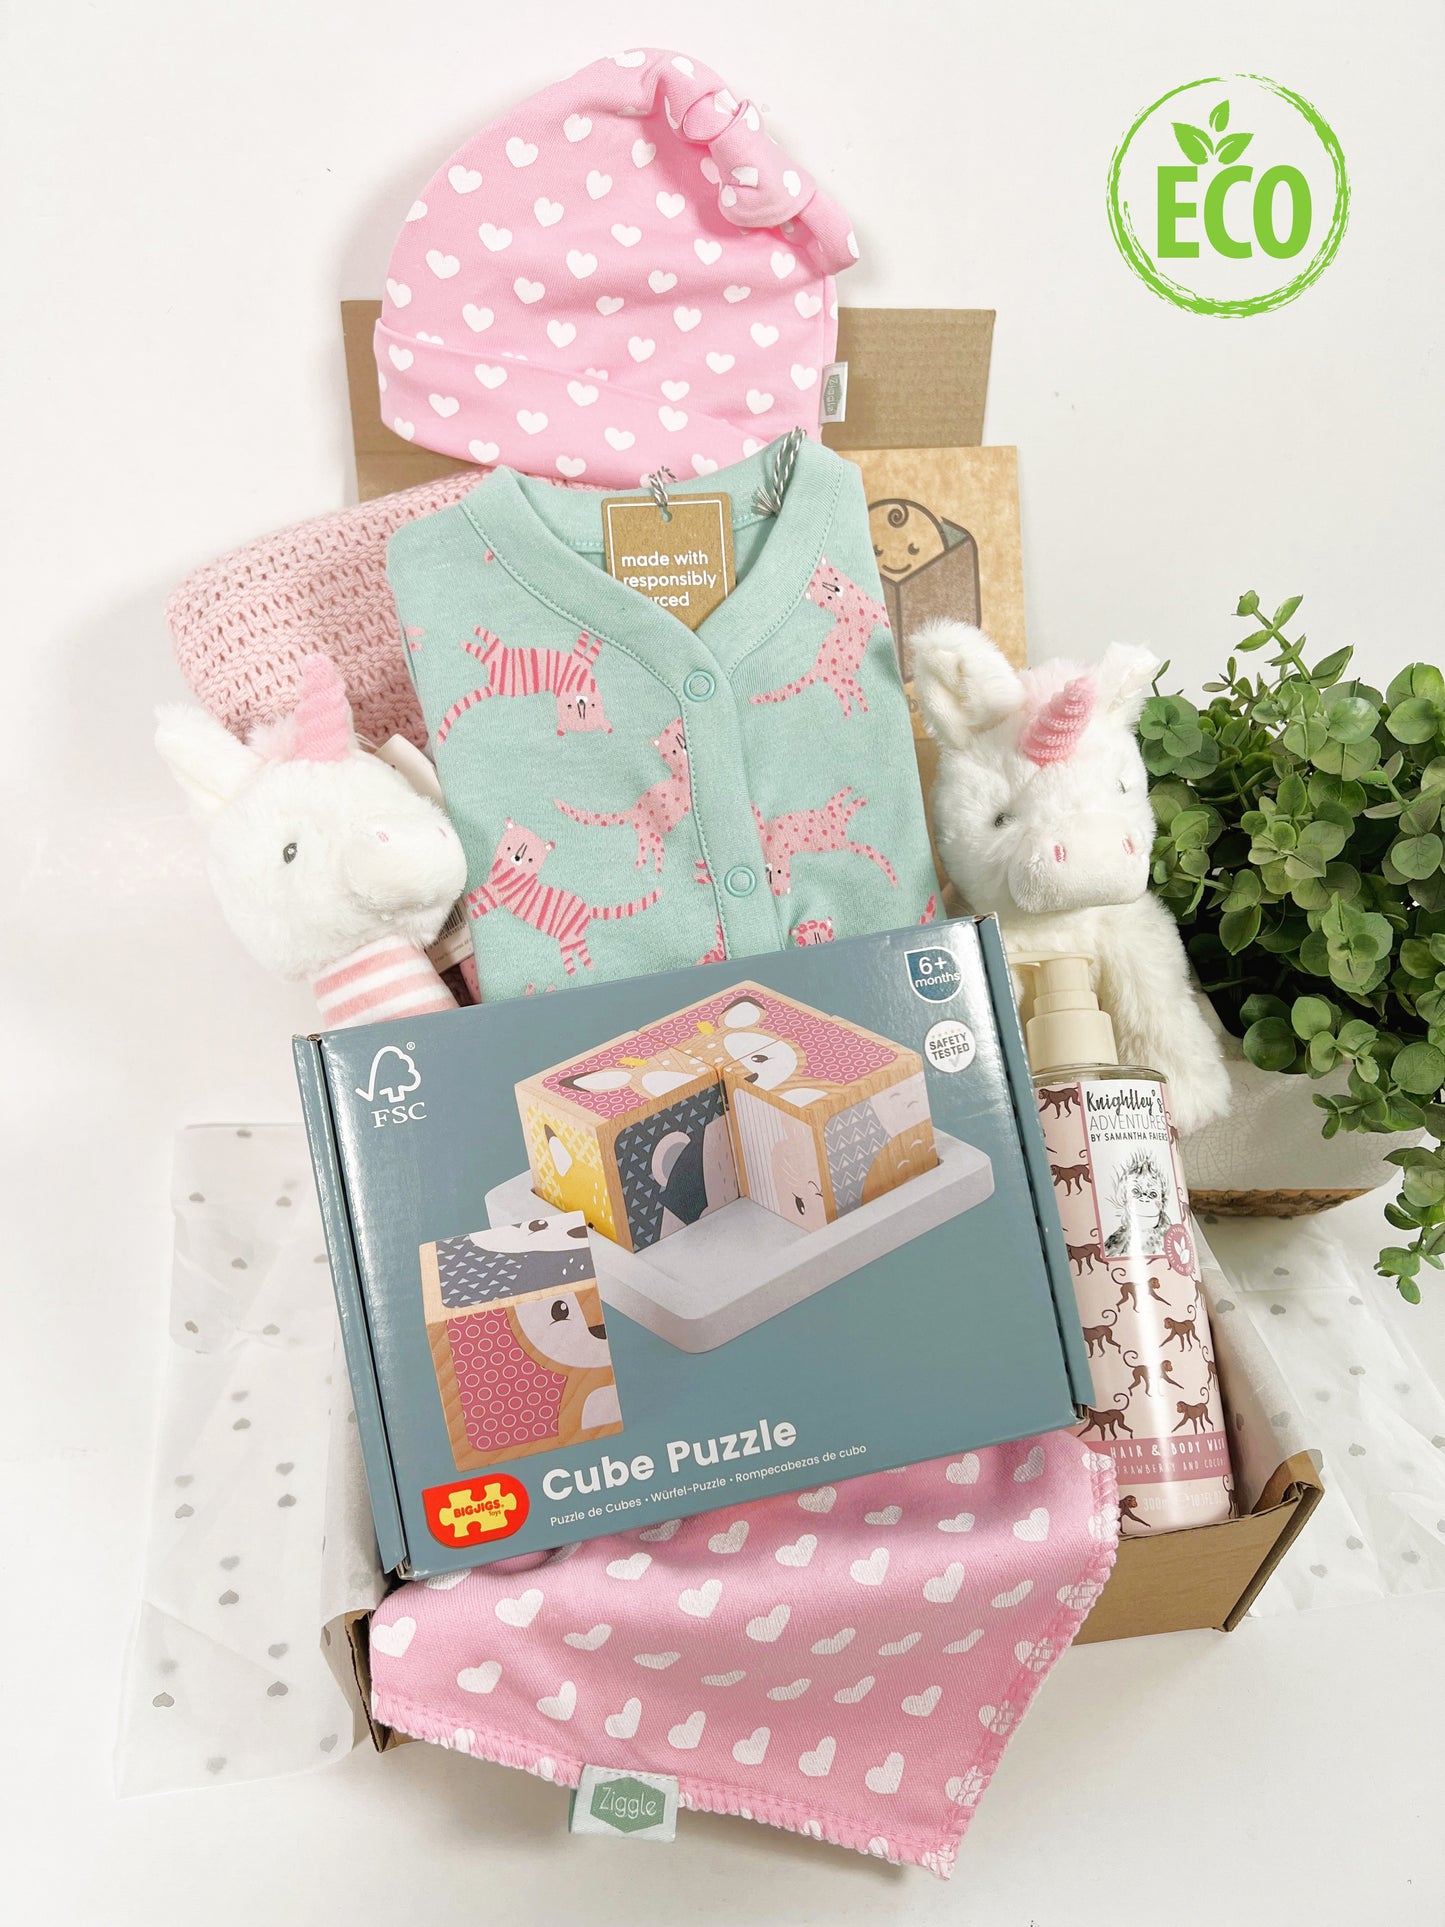 Newborn Baby Girl Gift Hamper ,Eco Friendly Baby Girl Present, Kitty Romper, Pink Cotton Cellular Baby Blanket, New Mum Gifts, Baby Shower Gifts for Girls